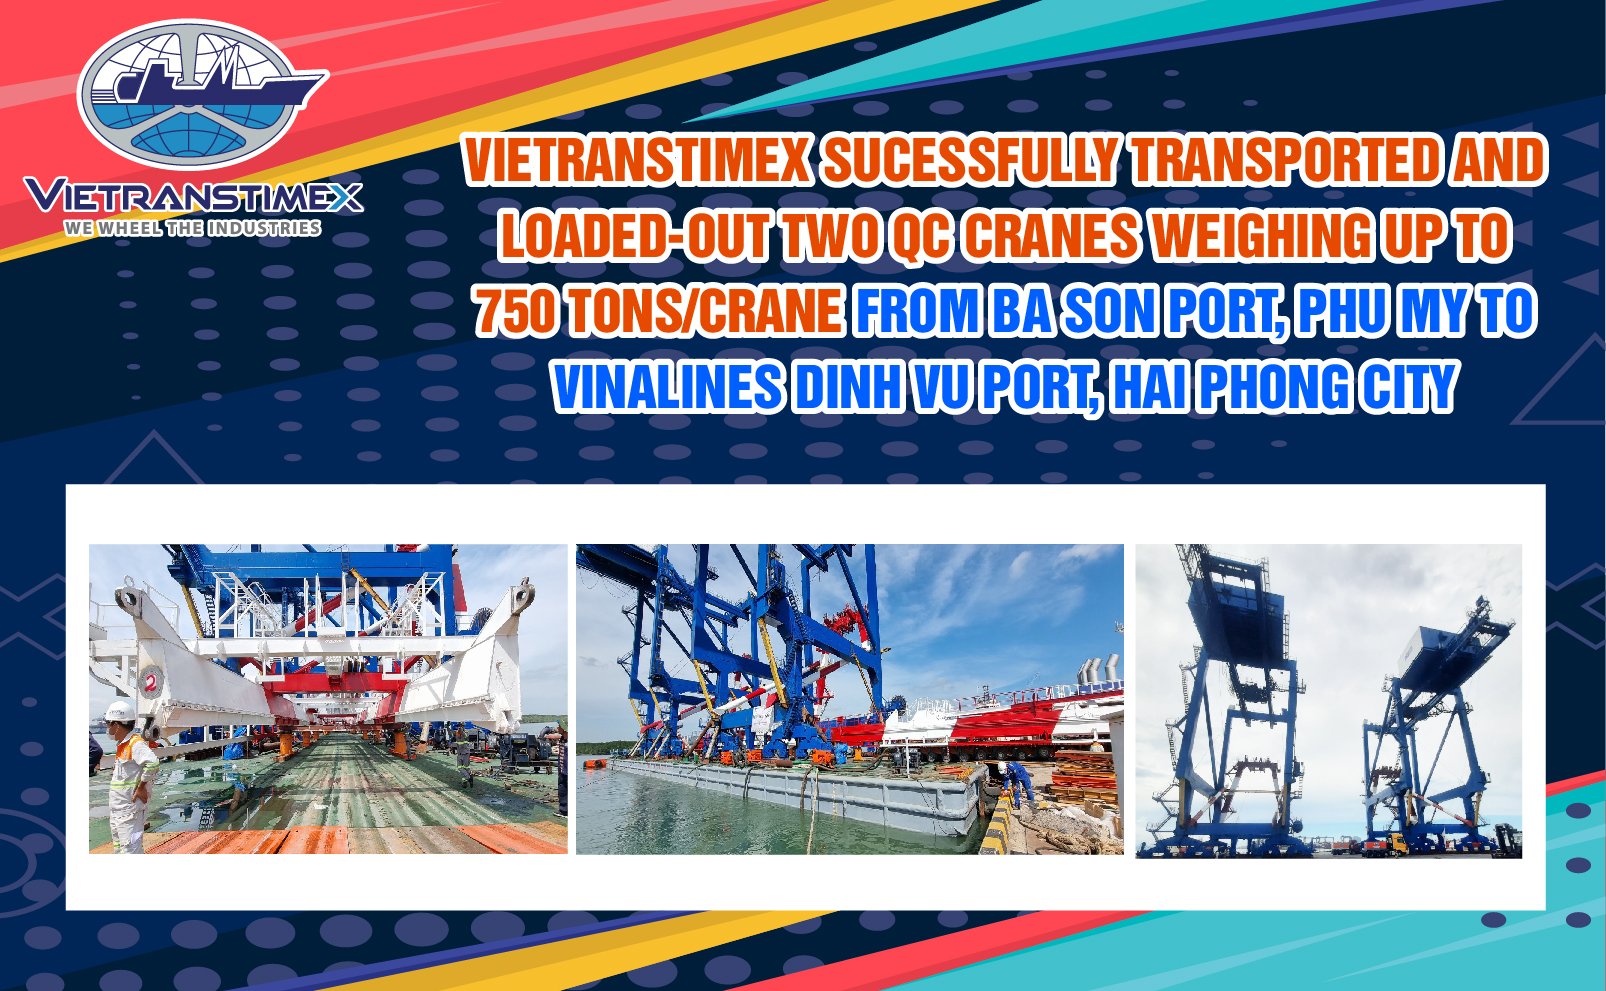 TRANSPORTED AND LOADED-OUT TWO QC CRANES (750 TONS/CRANE) FROM BA SON PORT, PHU MY TO VINALINES DINH VU PORT, HAI PHONG CITY (AUGUST 2021)